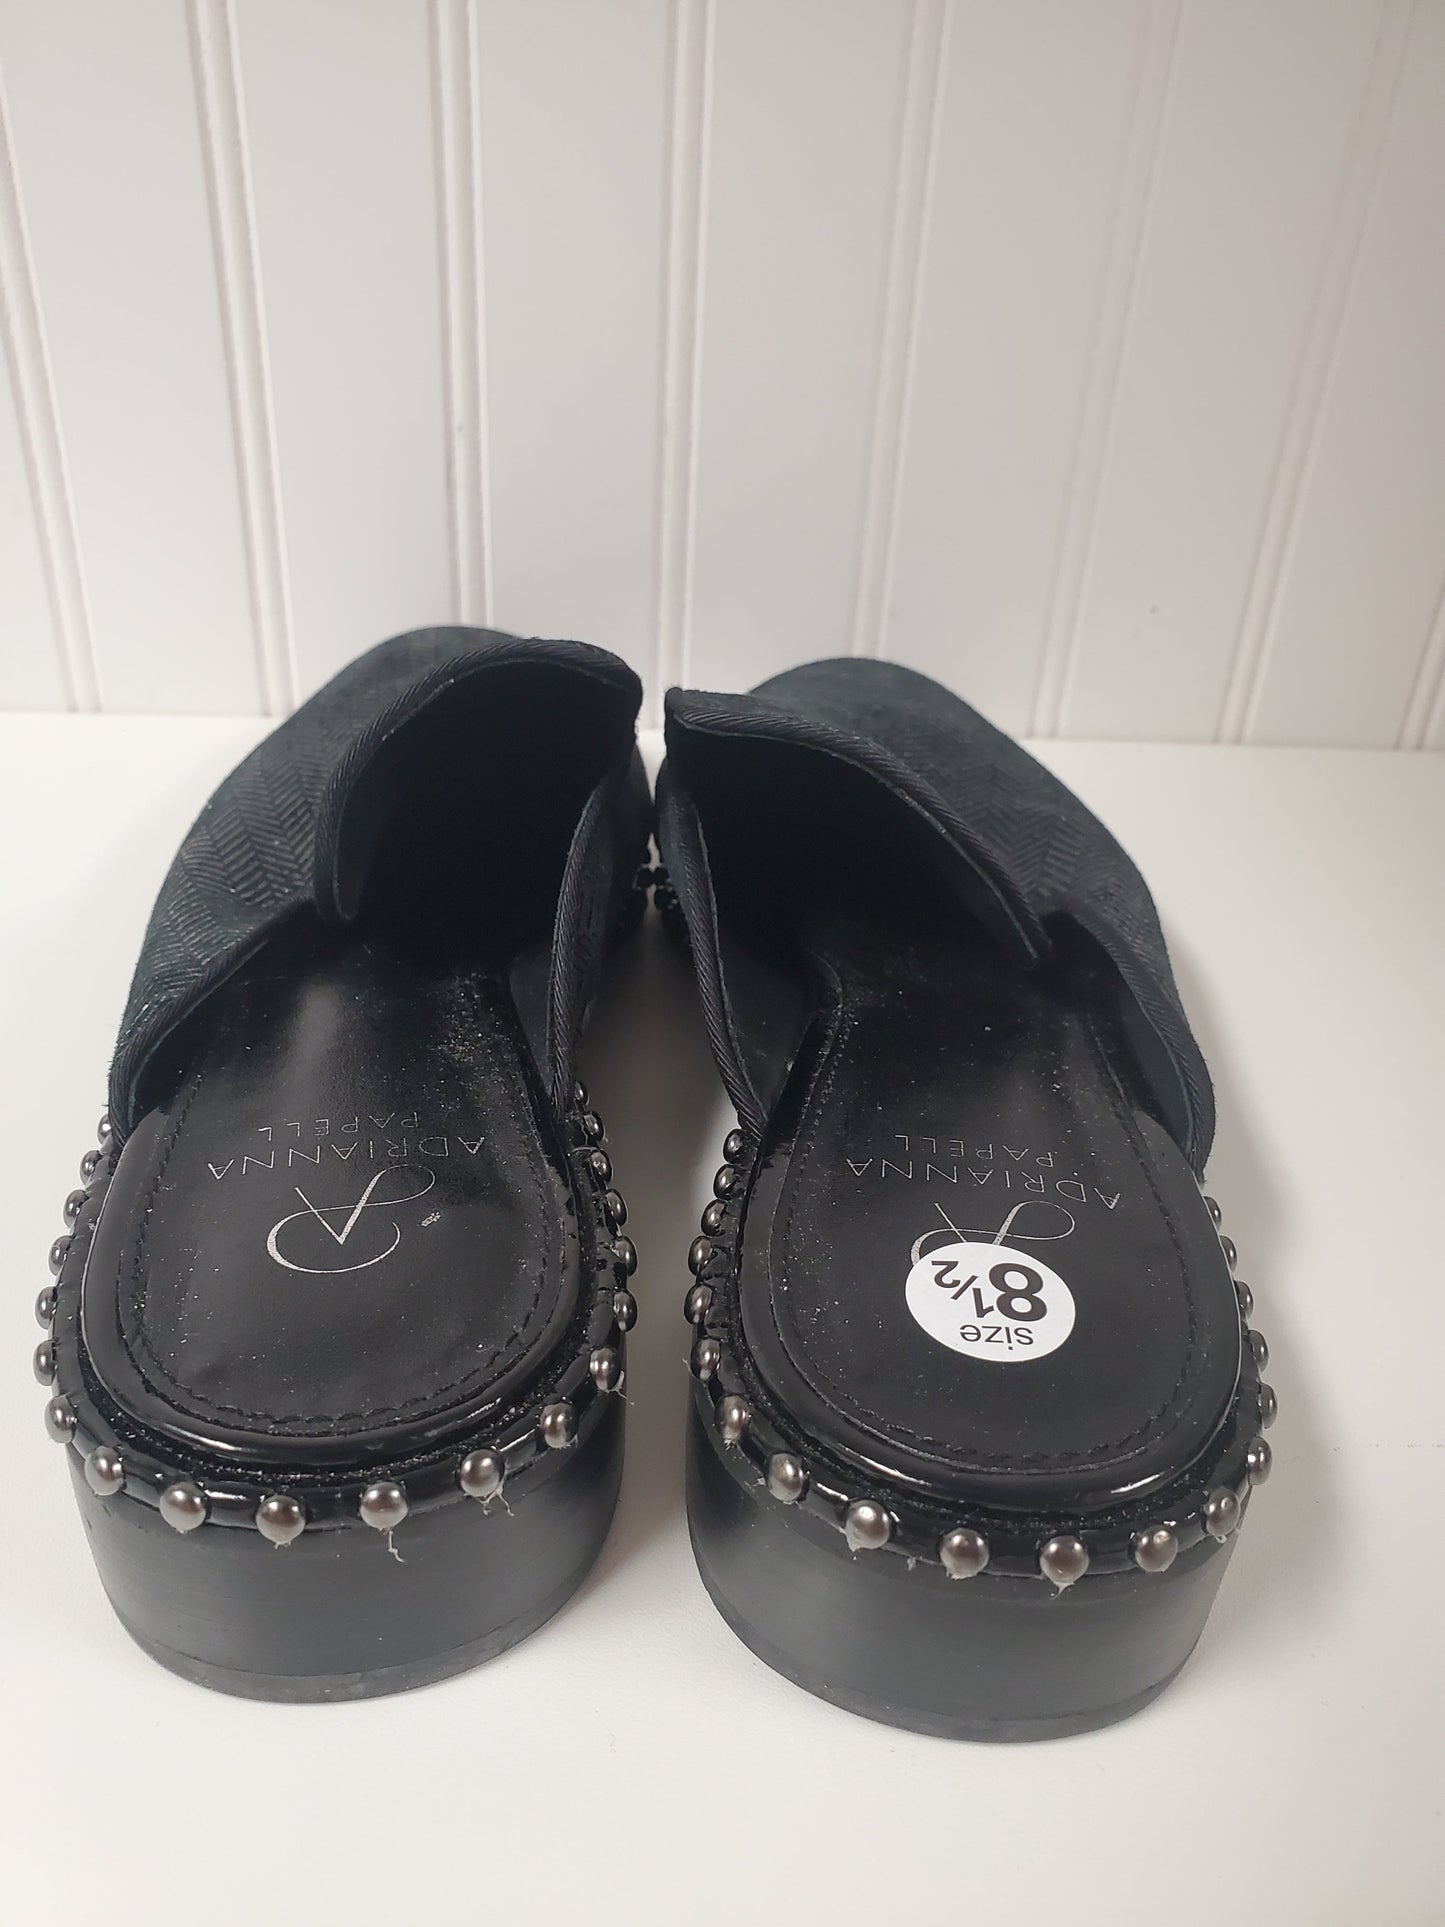 Black Shoes Flats Adrianna Papell, Size 8.5